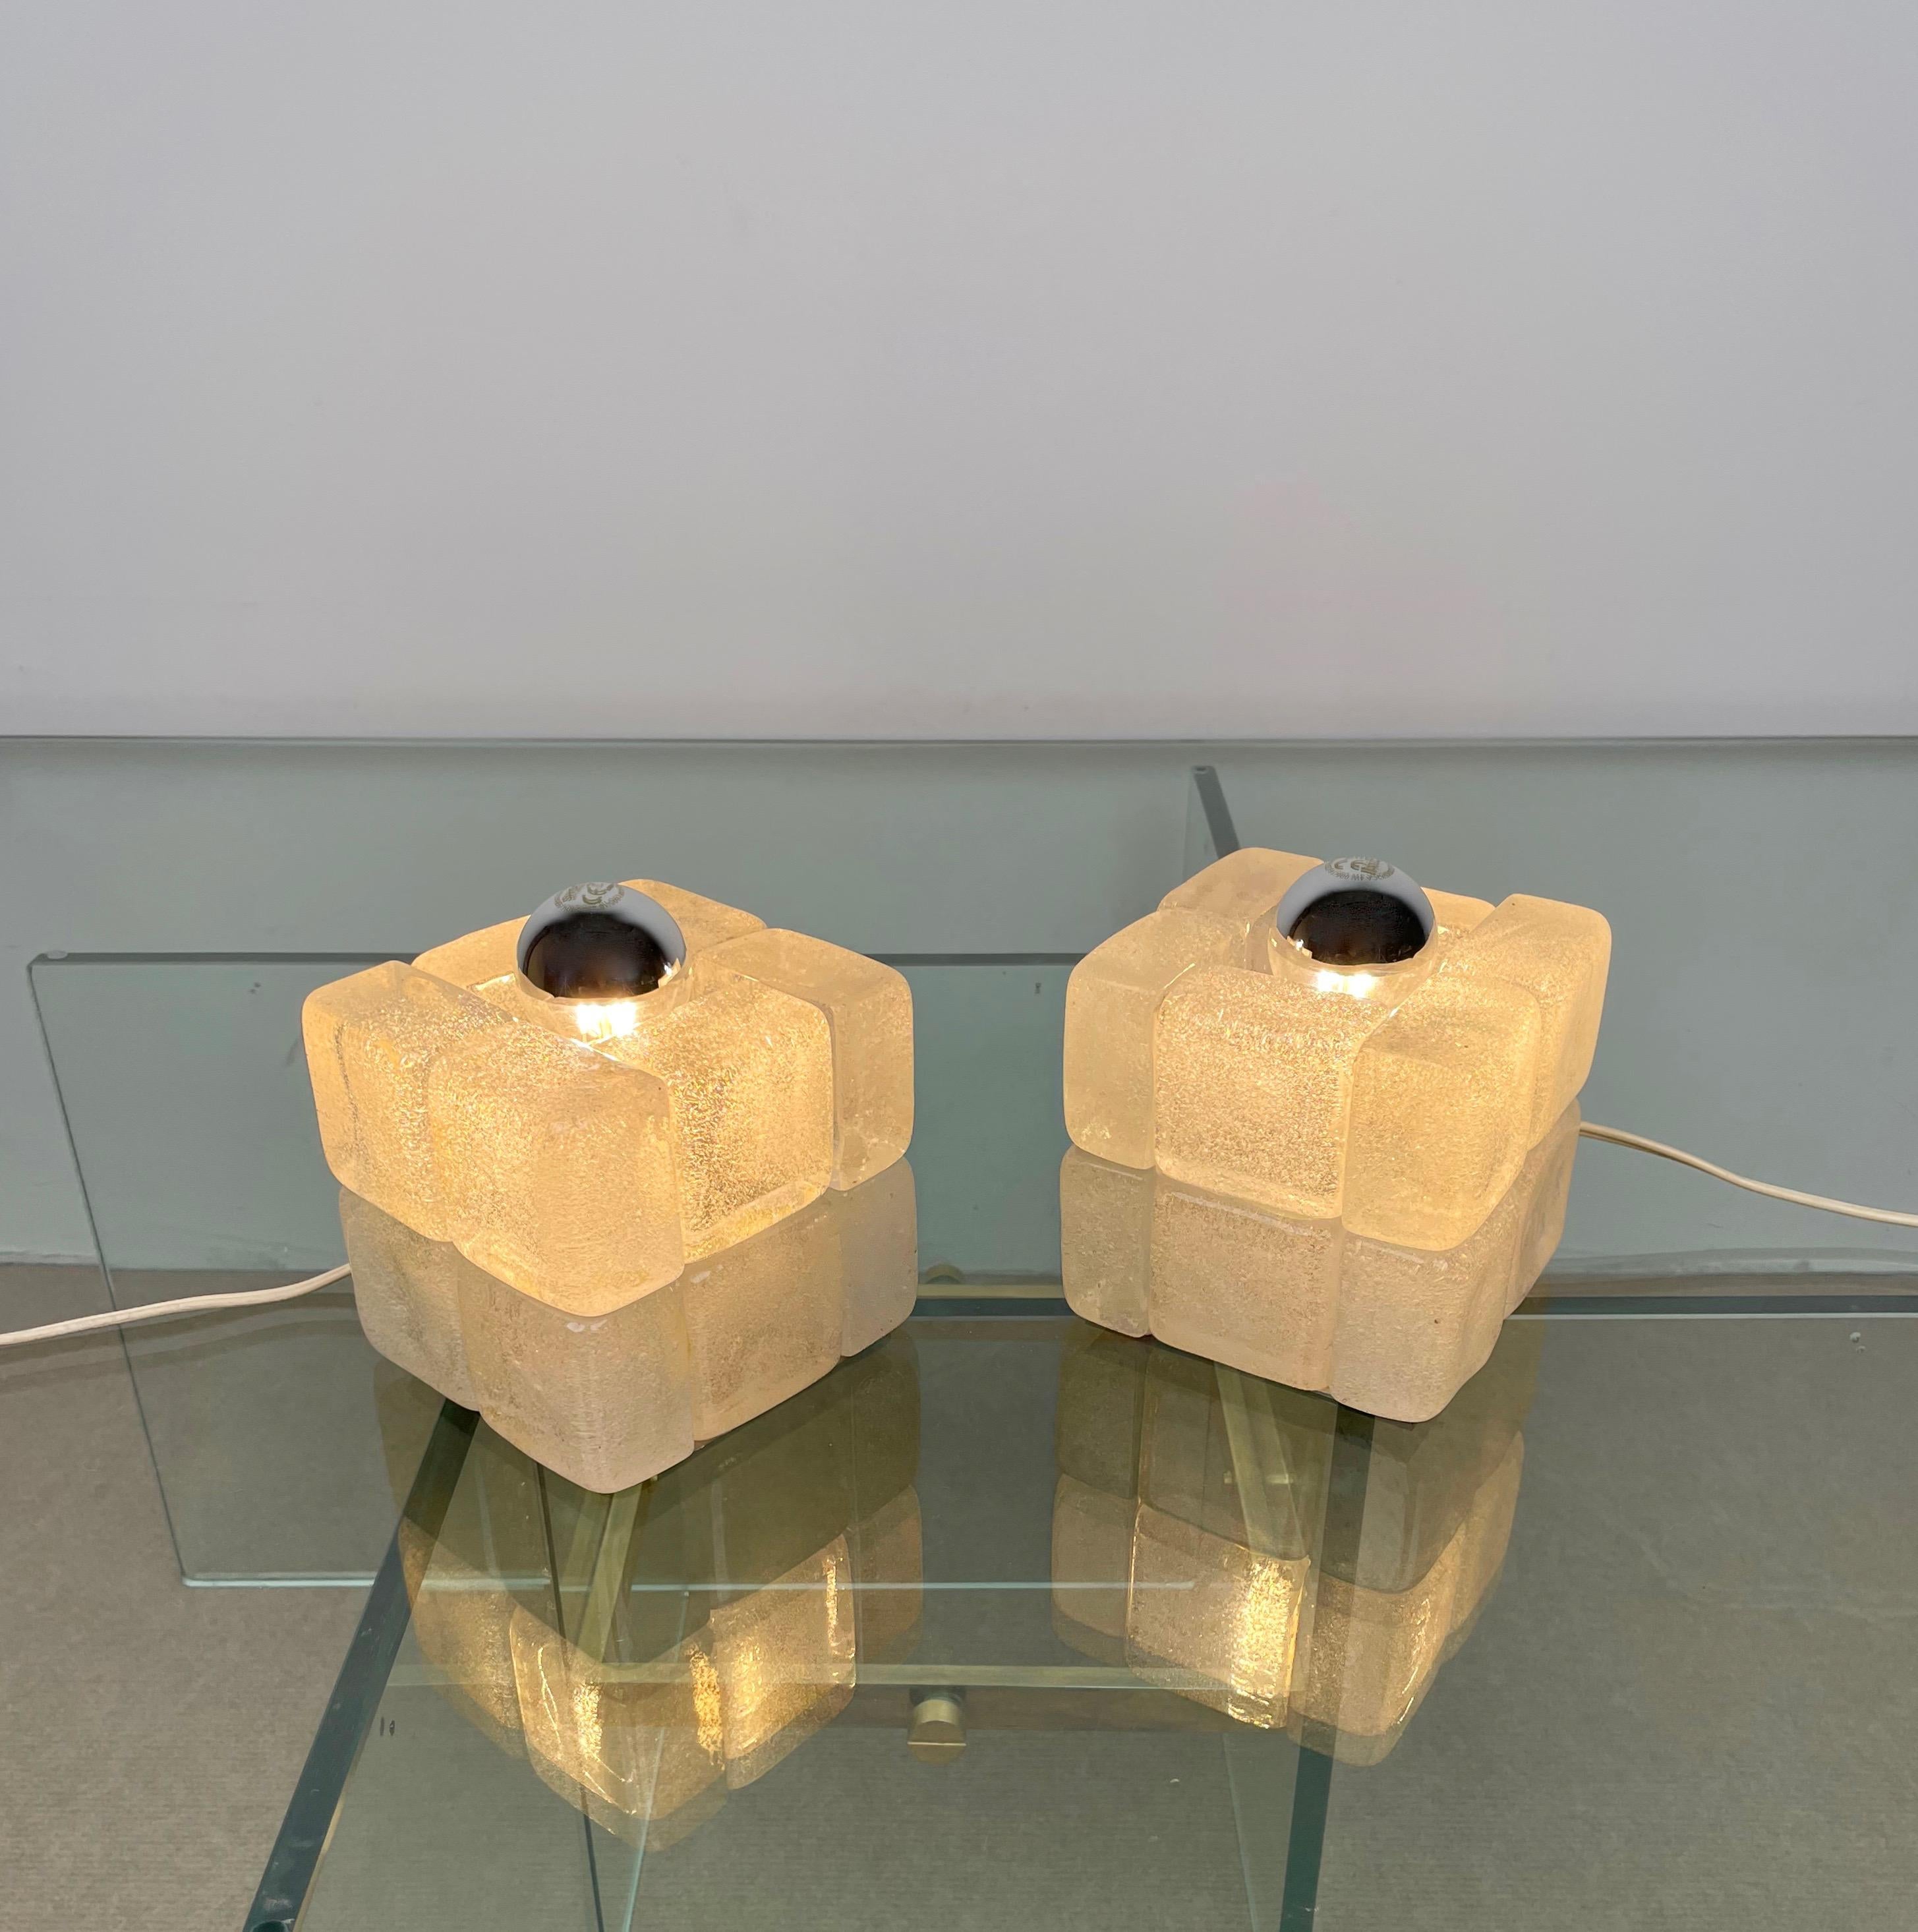 Pair of Murano Glass Cube Lamps by Albano Poli for Poliarte, Italy, 1970s For Sale 3